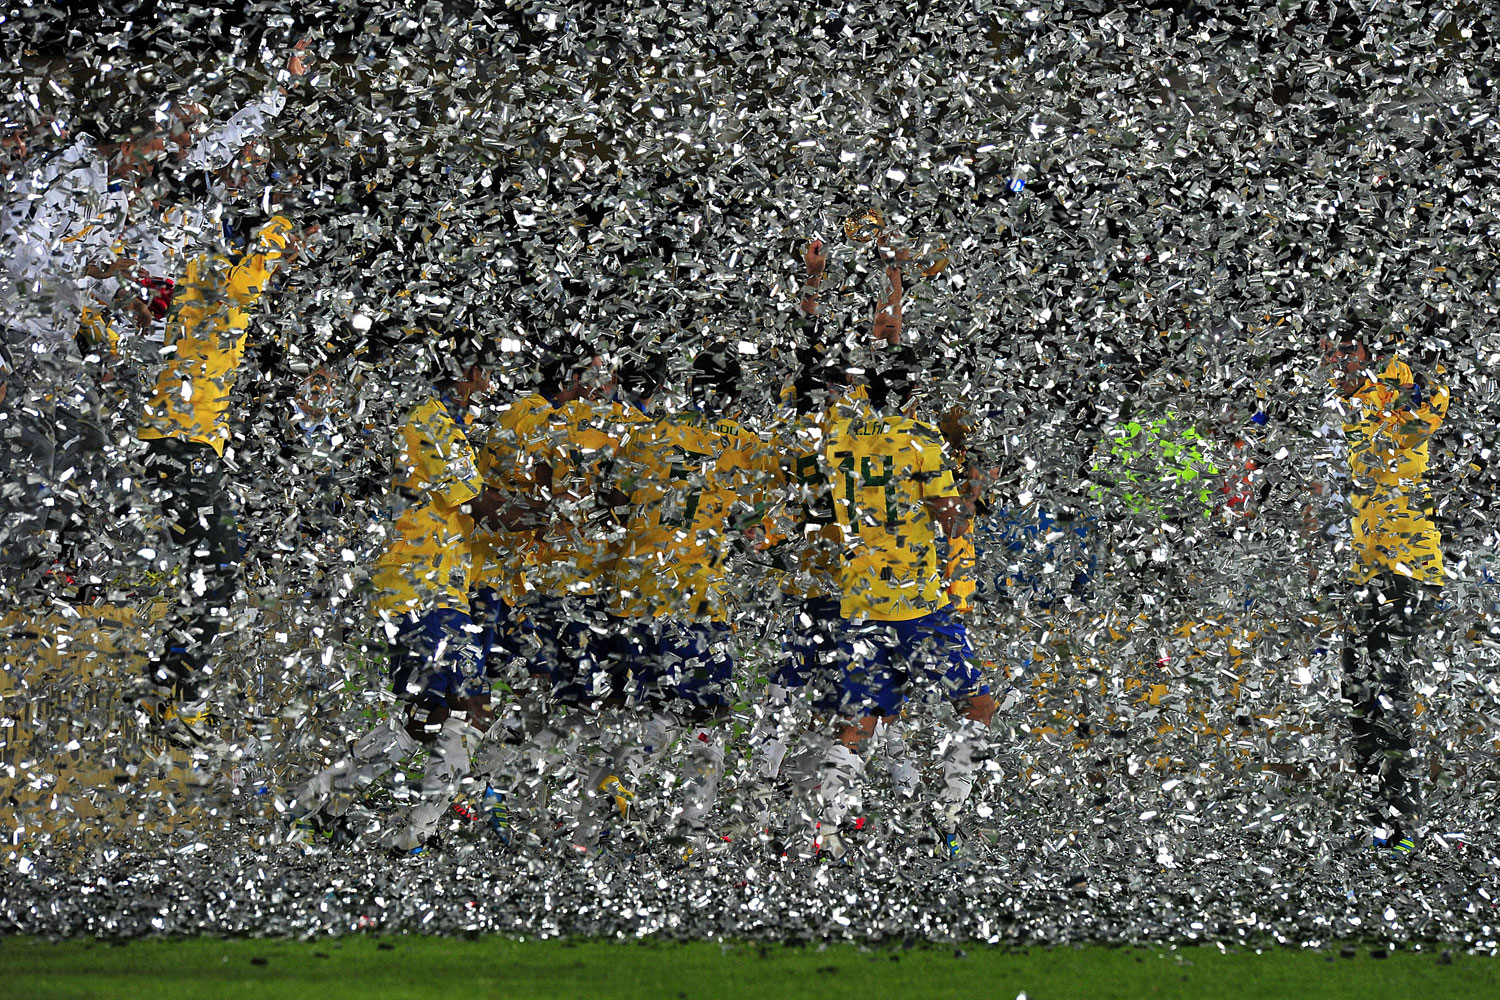 August 20, 2011. Brazilian players celebrate at the end of the FIFA 2011 Under-20 World Cup final match against Portugal in Bogota, Columbia. Brazil won 3-2 in overtime.